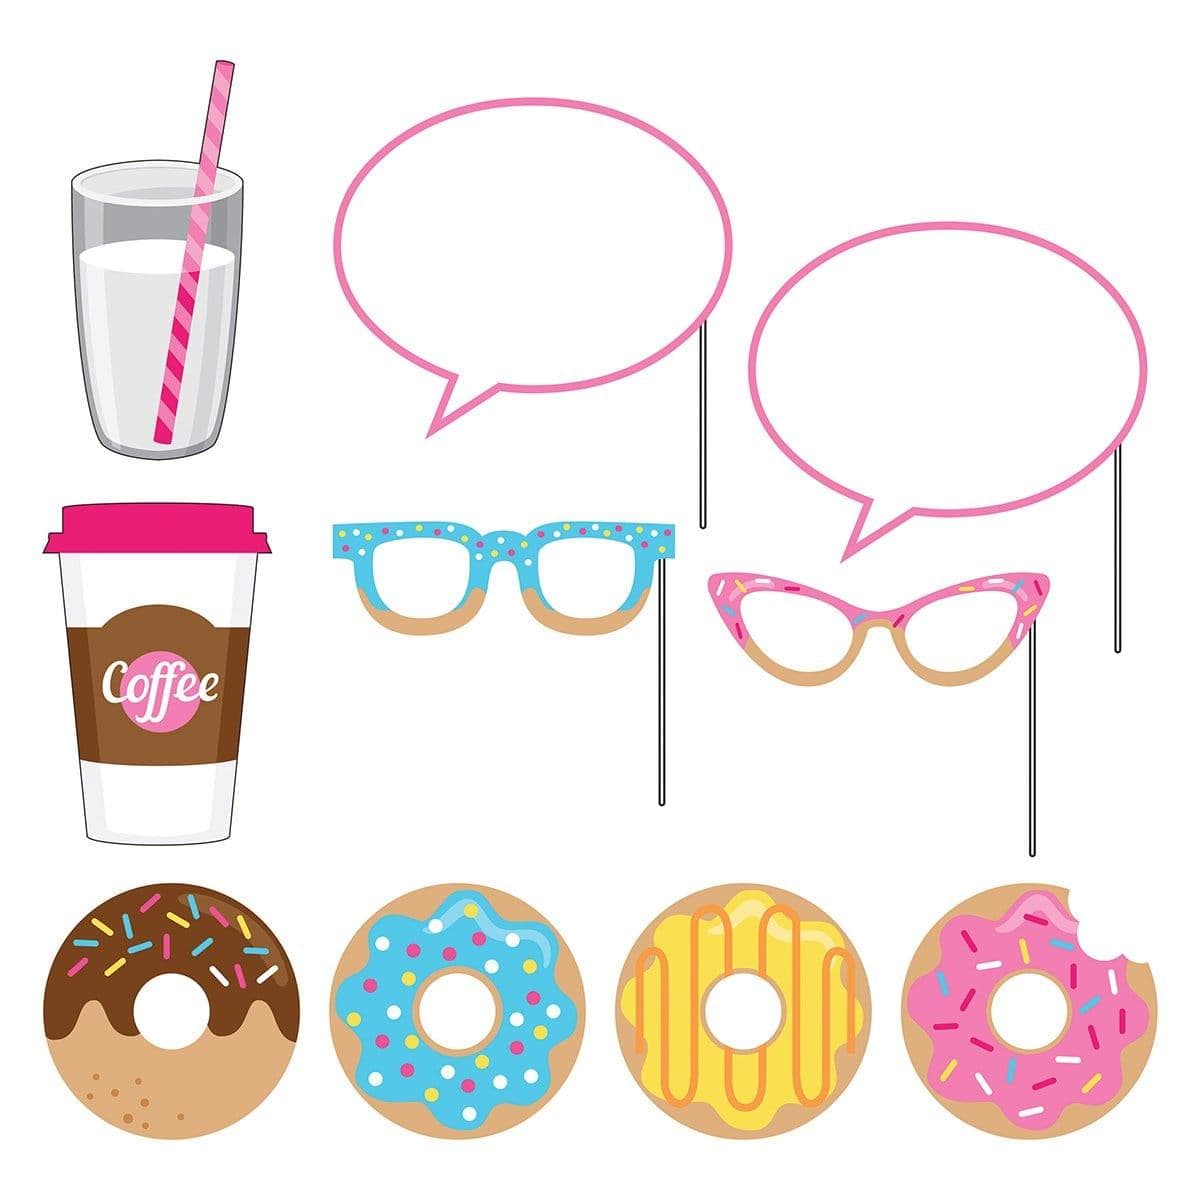 Buy Kids Birthday Donut Time photo booth props, 10 per package sold at Party Expert